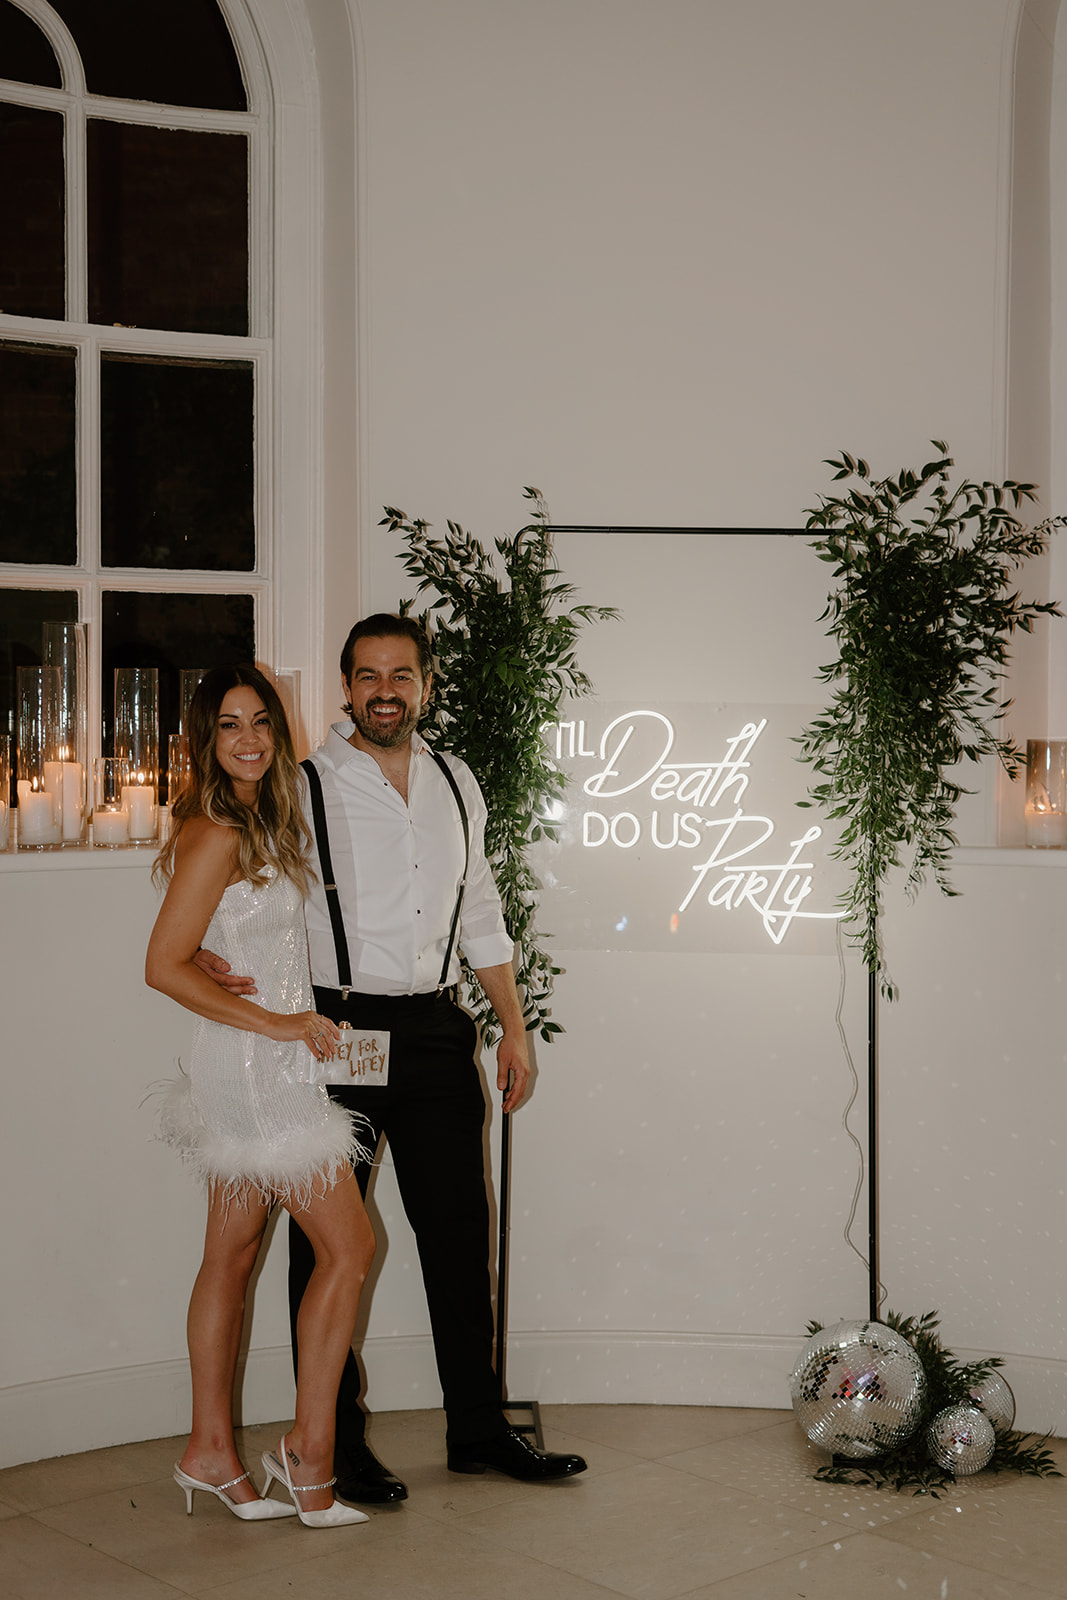 A bride and groom stand proudly next to a neon sign that says 'til death do us party'